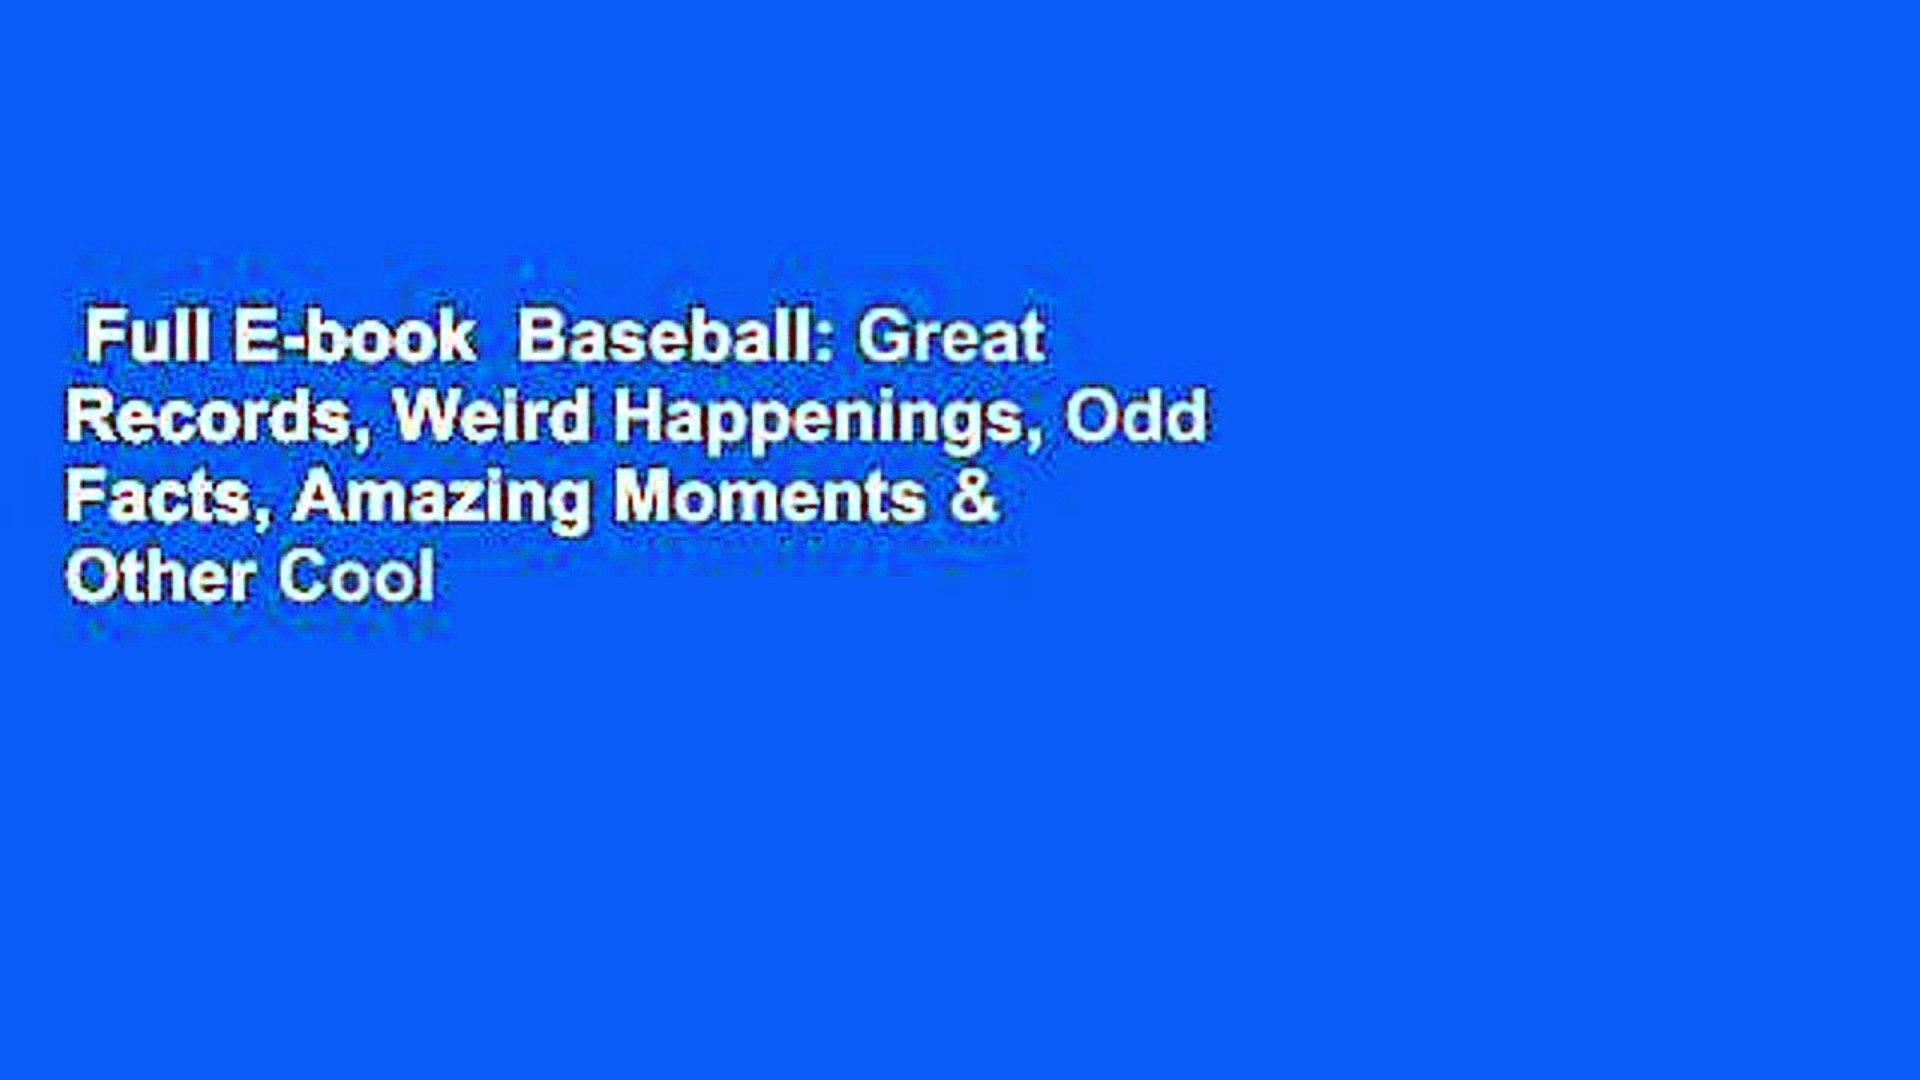 â�£Full E-book  Baseball: Great Records, Weird Happenings, Odd Facts, Amazing Moments & Other Cool